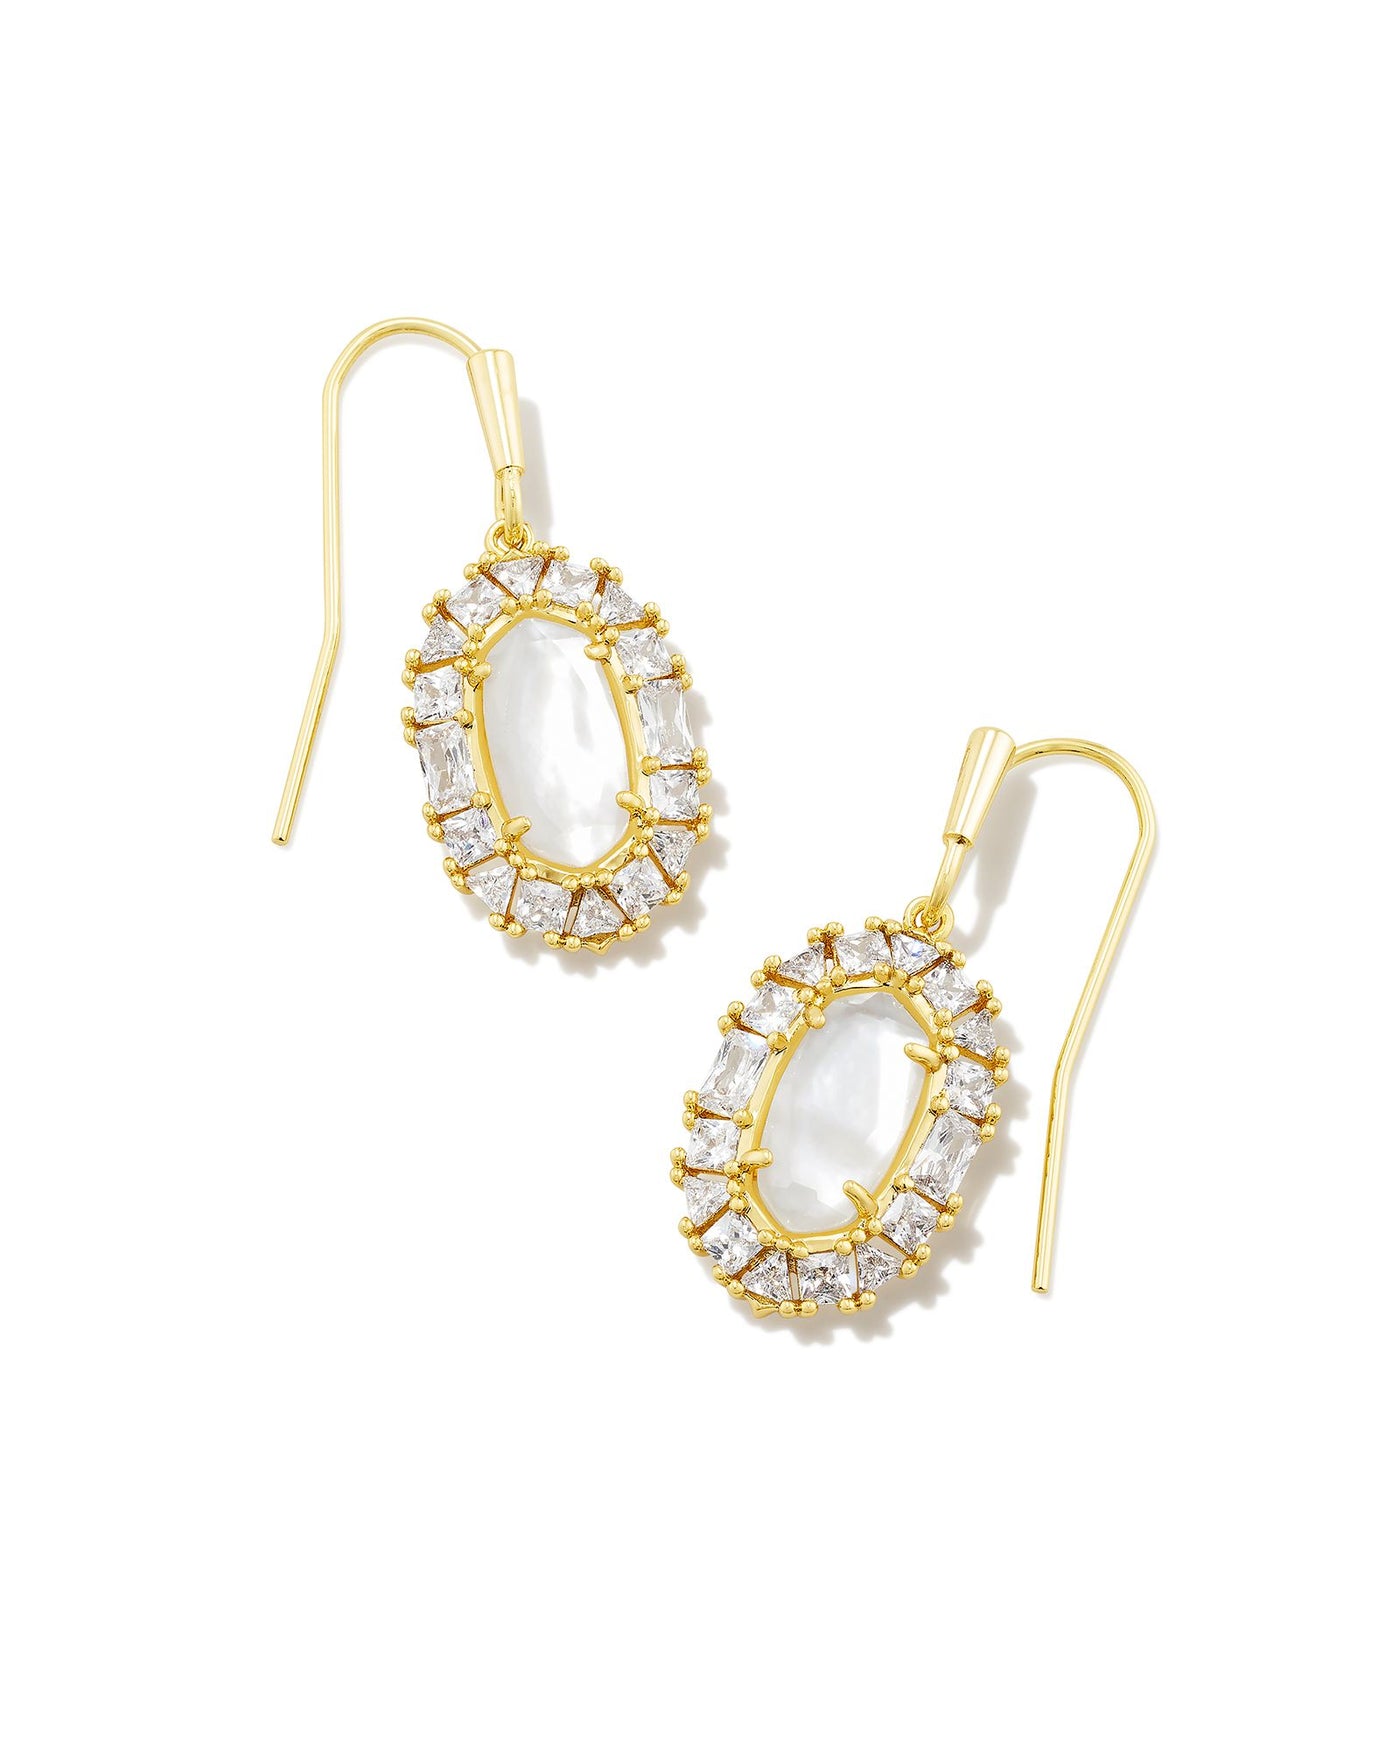 Kendra Scott Lee Crystal Frame Drop Earrings in Mother of Pearl-Earrings-Kendra Scott-Market Street Nest, Fashionable Clothing, Shoes and Home Décor Located in Mabank, TX